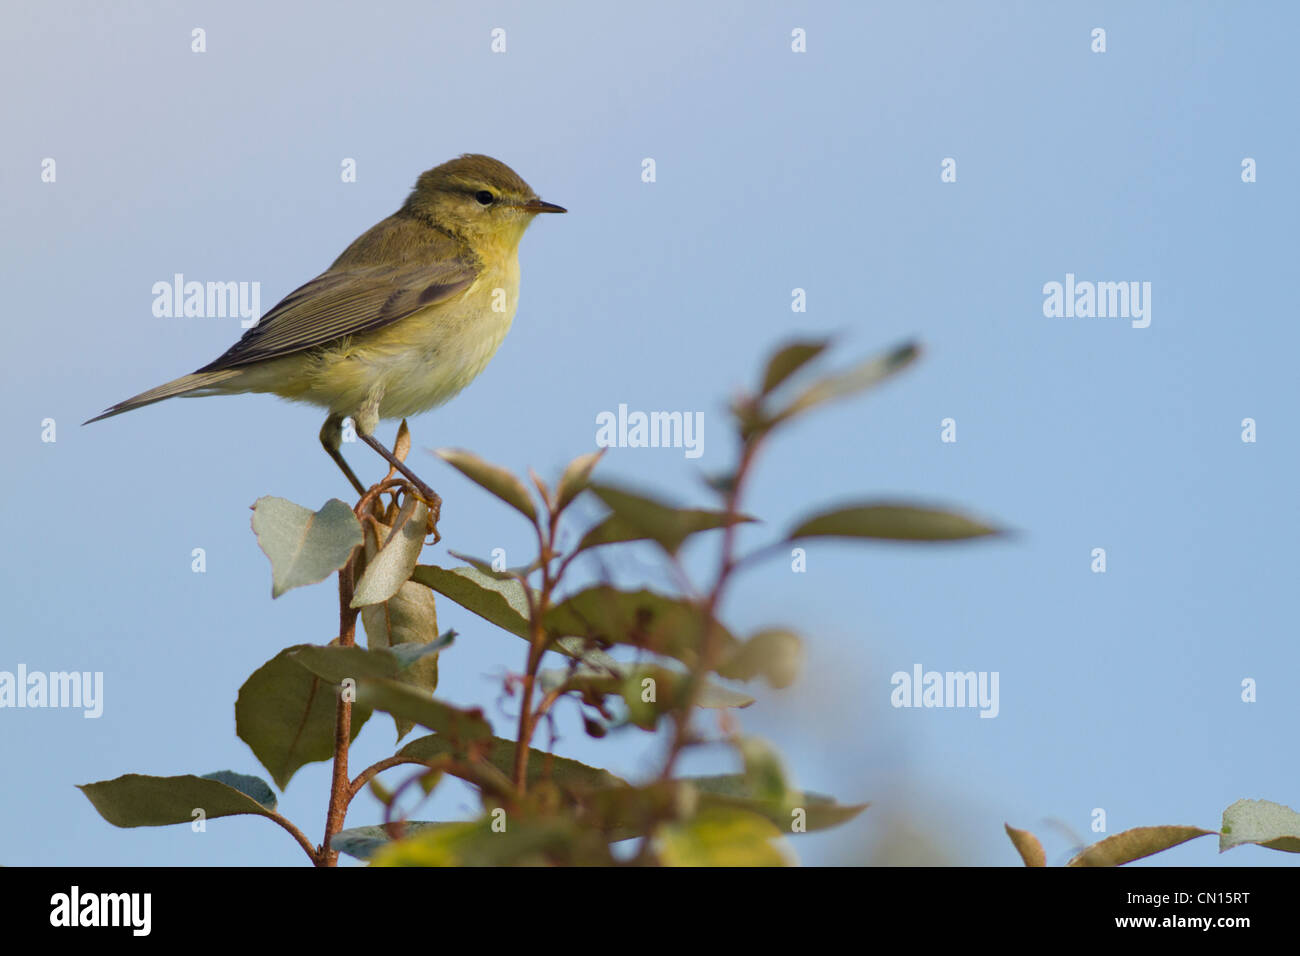 Willow Warbler (Phylloscopus trochilus) perched on twig Stock Photo